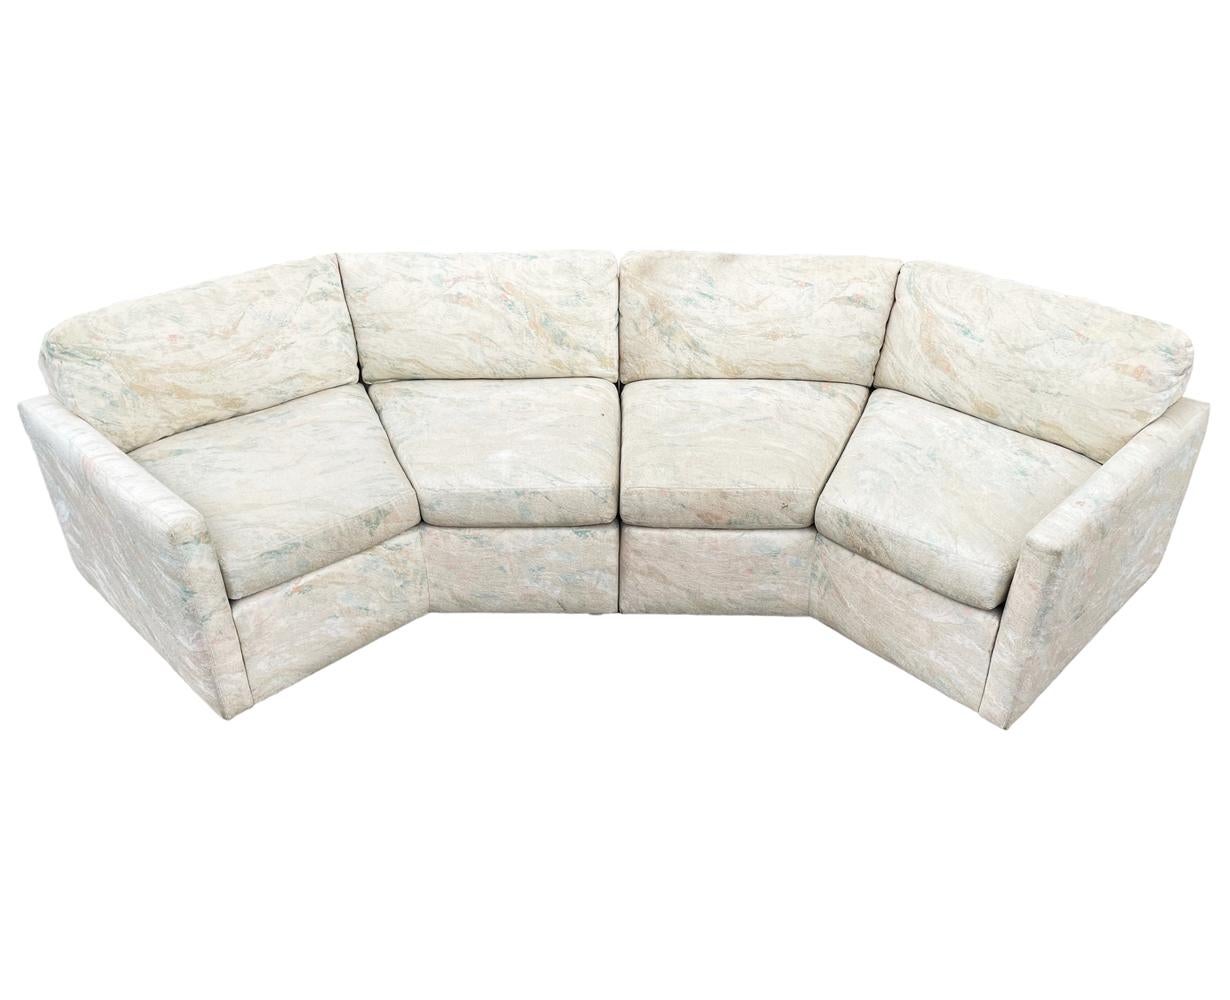 A sleek modern sofa in a hexagonal form circa 1970's. It features a two section design with low profile feet. Fabric is original and needs recovering. Foam and padding are fine. Seat depth measures 22.5 inches.